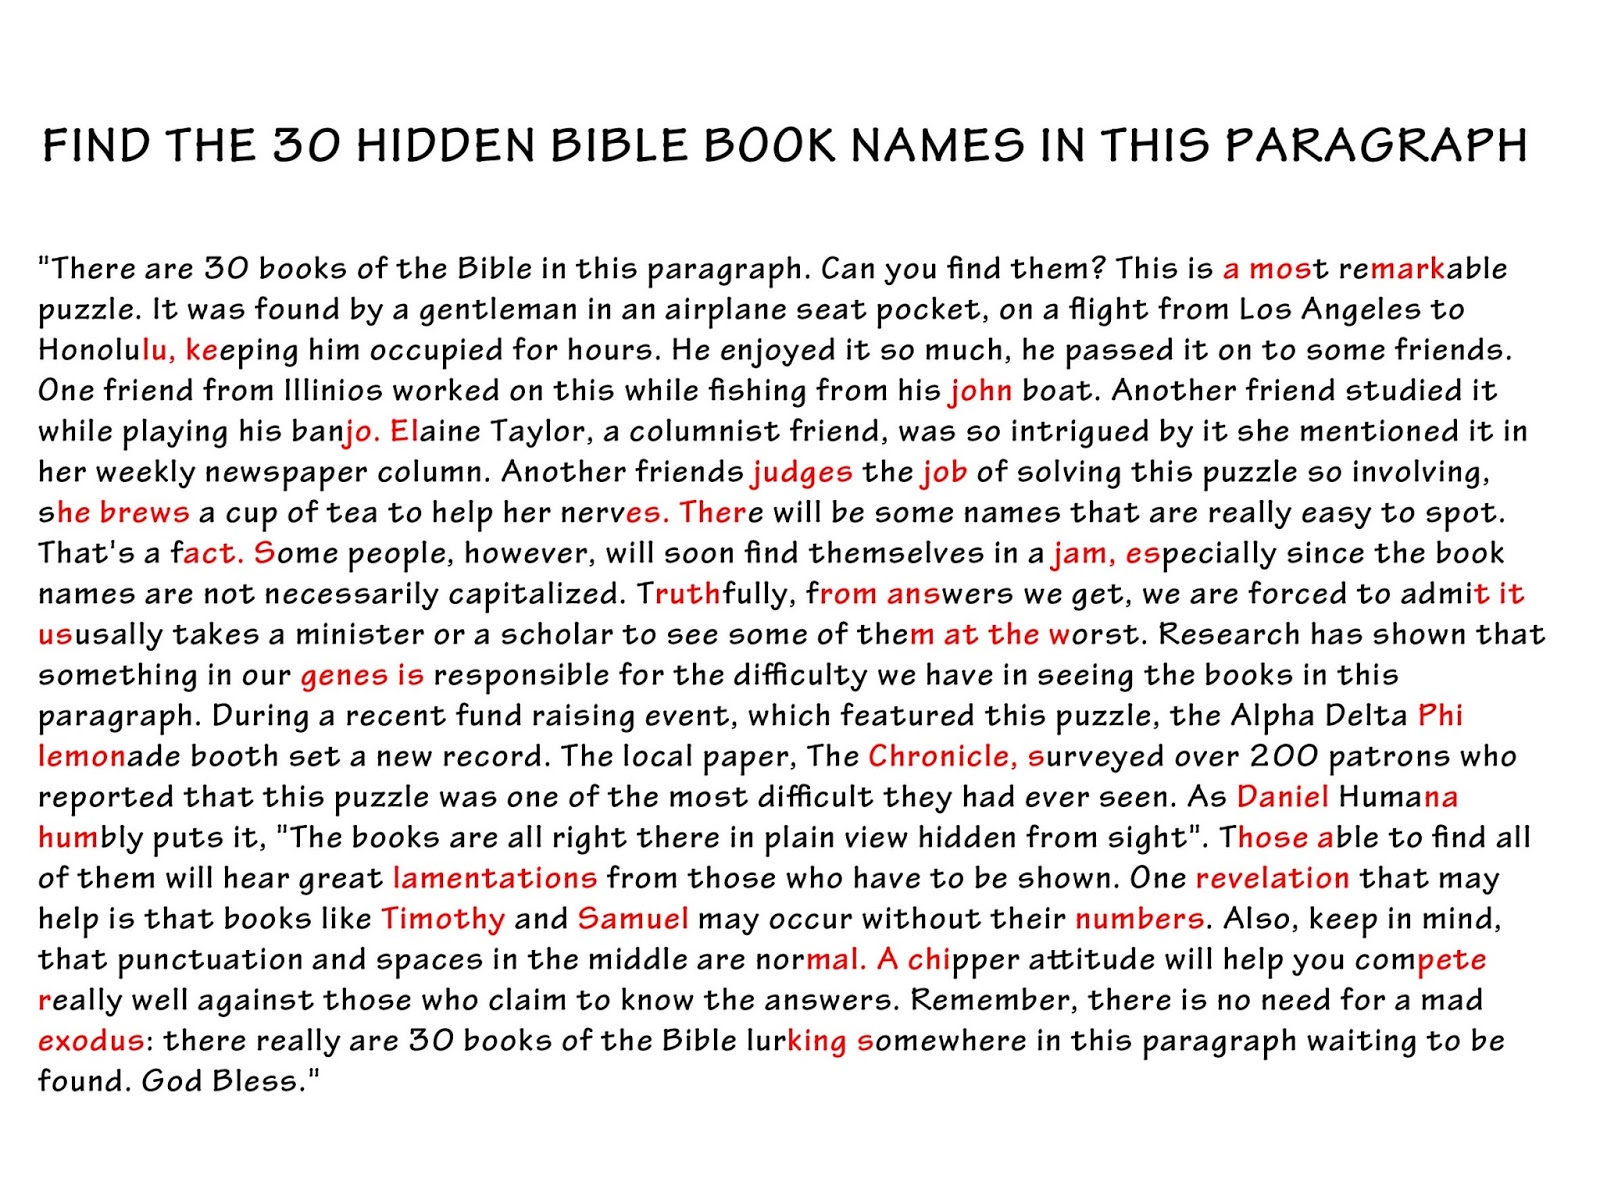 kopje-thee-a-hidden-books-of-the-bible-puzzle